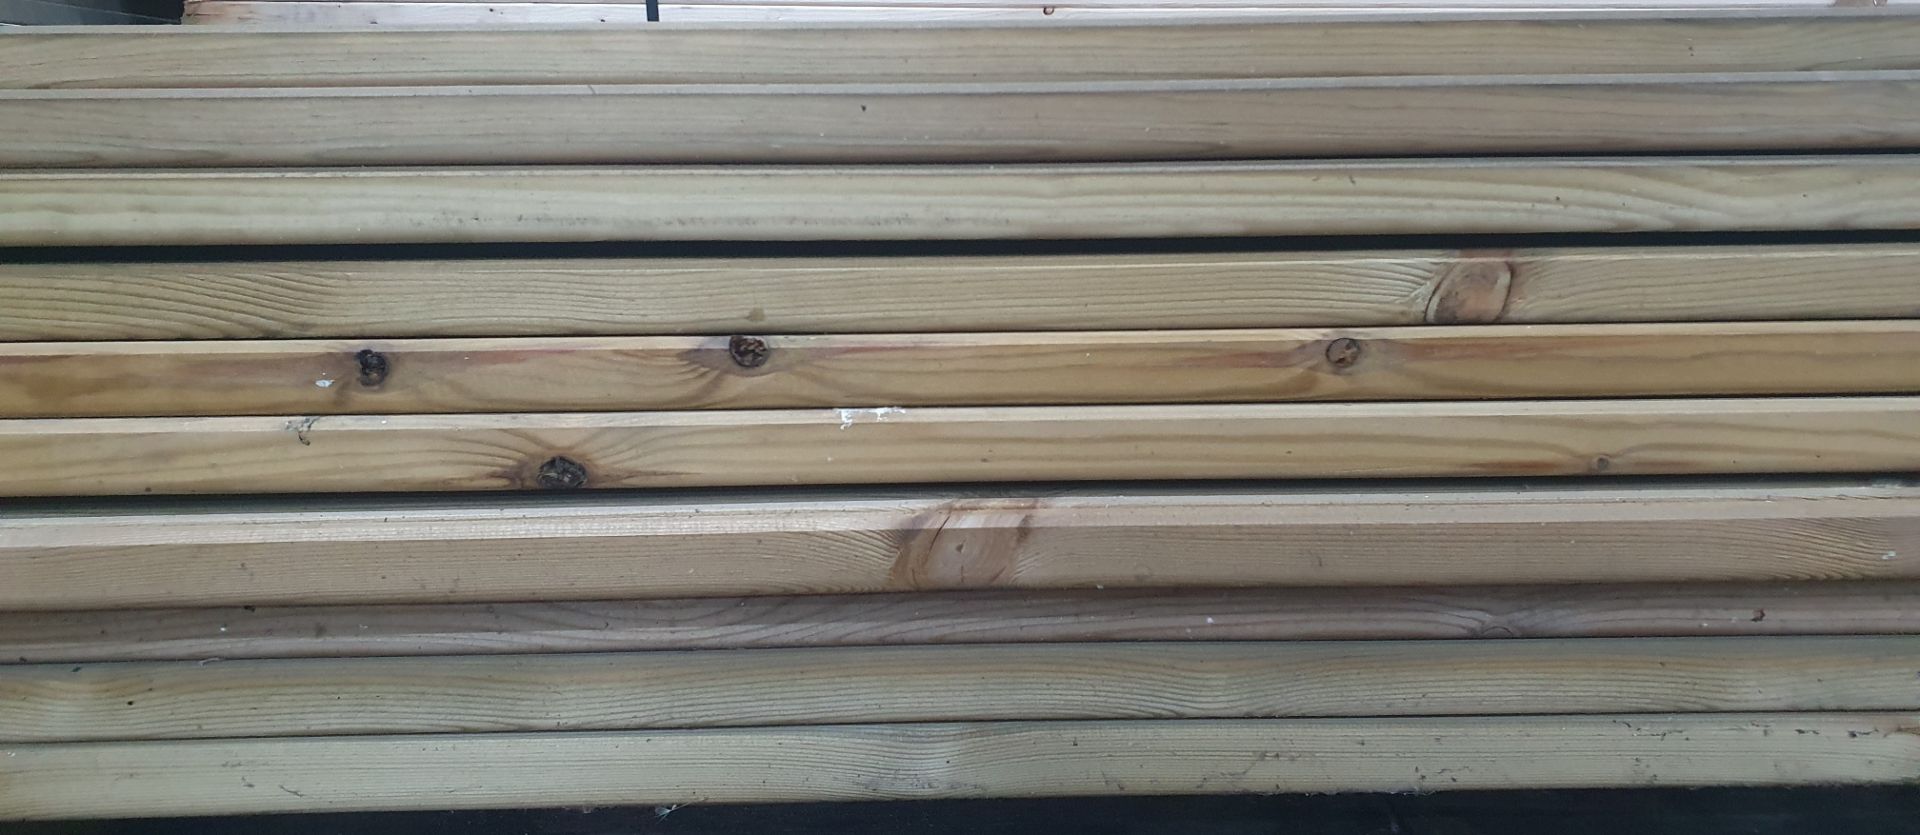 55 x Lengths of Decking | Size: (L) 420cm x (W) 14cm x (H) 3cm - Image 4 of 6